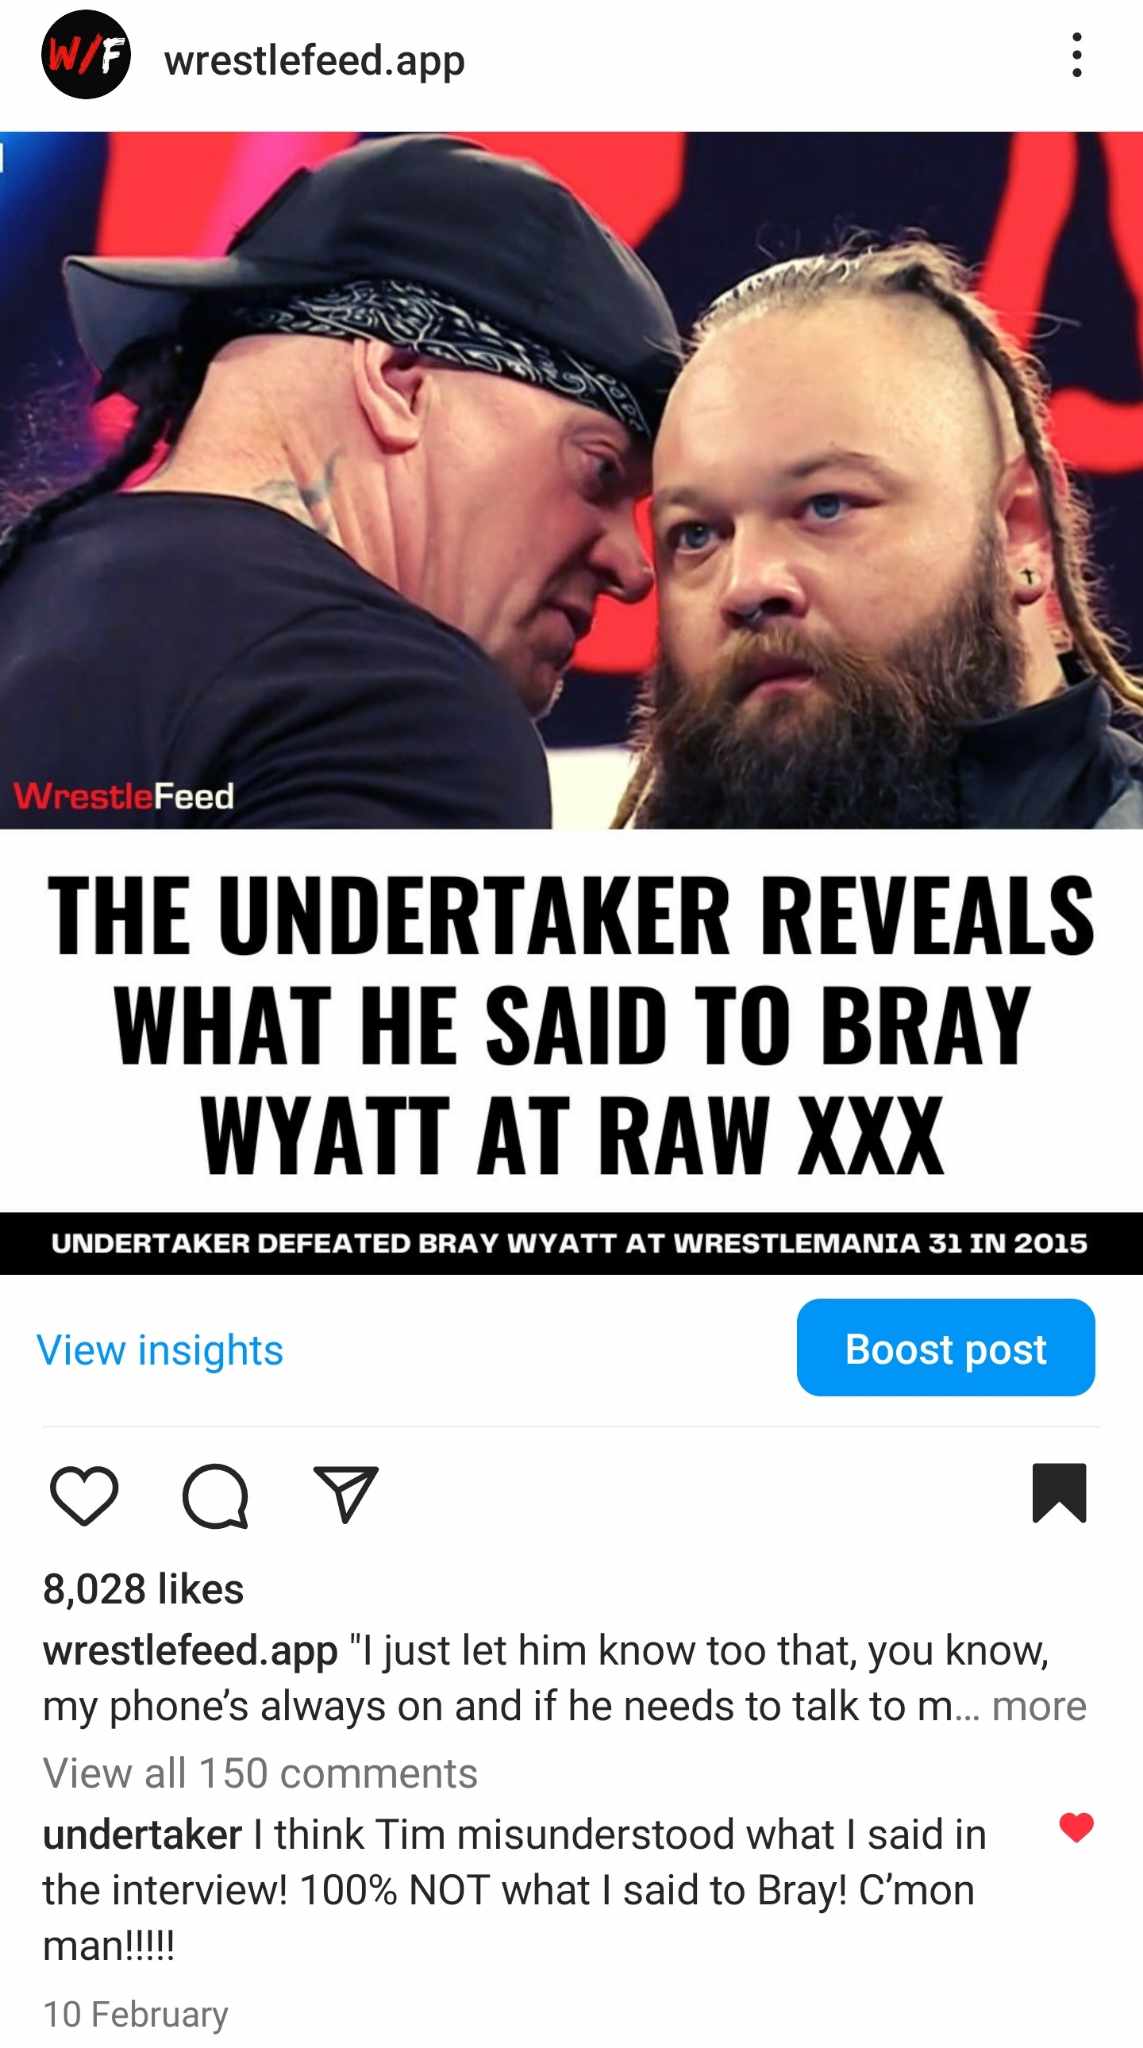 The Undertaker Didn't Reveal What He Said To Bray Wyatt At RAW XXX 30 WWE January 2023 WrestleFeed App Instagram